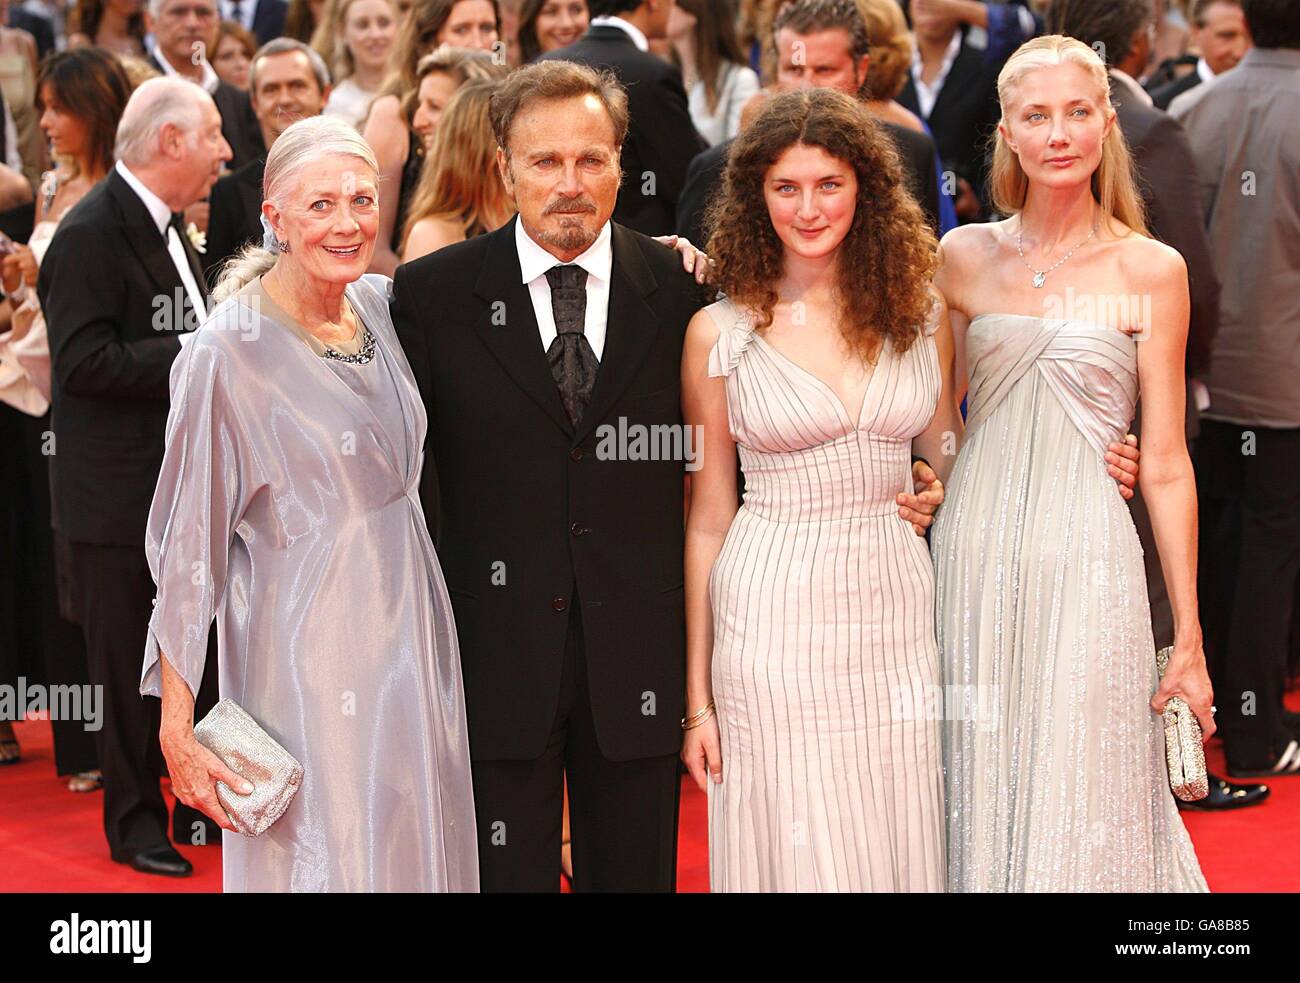 ctors Franco Nero, Daisy Bevan, Vanessa Redgrave an Joely Richardson at the premiere of Atonement at the 64th Venice International Film Festival. Stock Photo